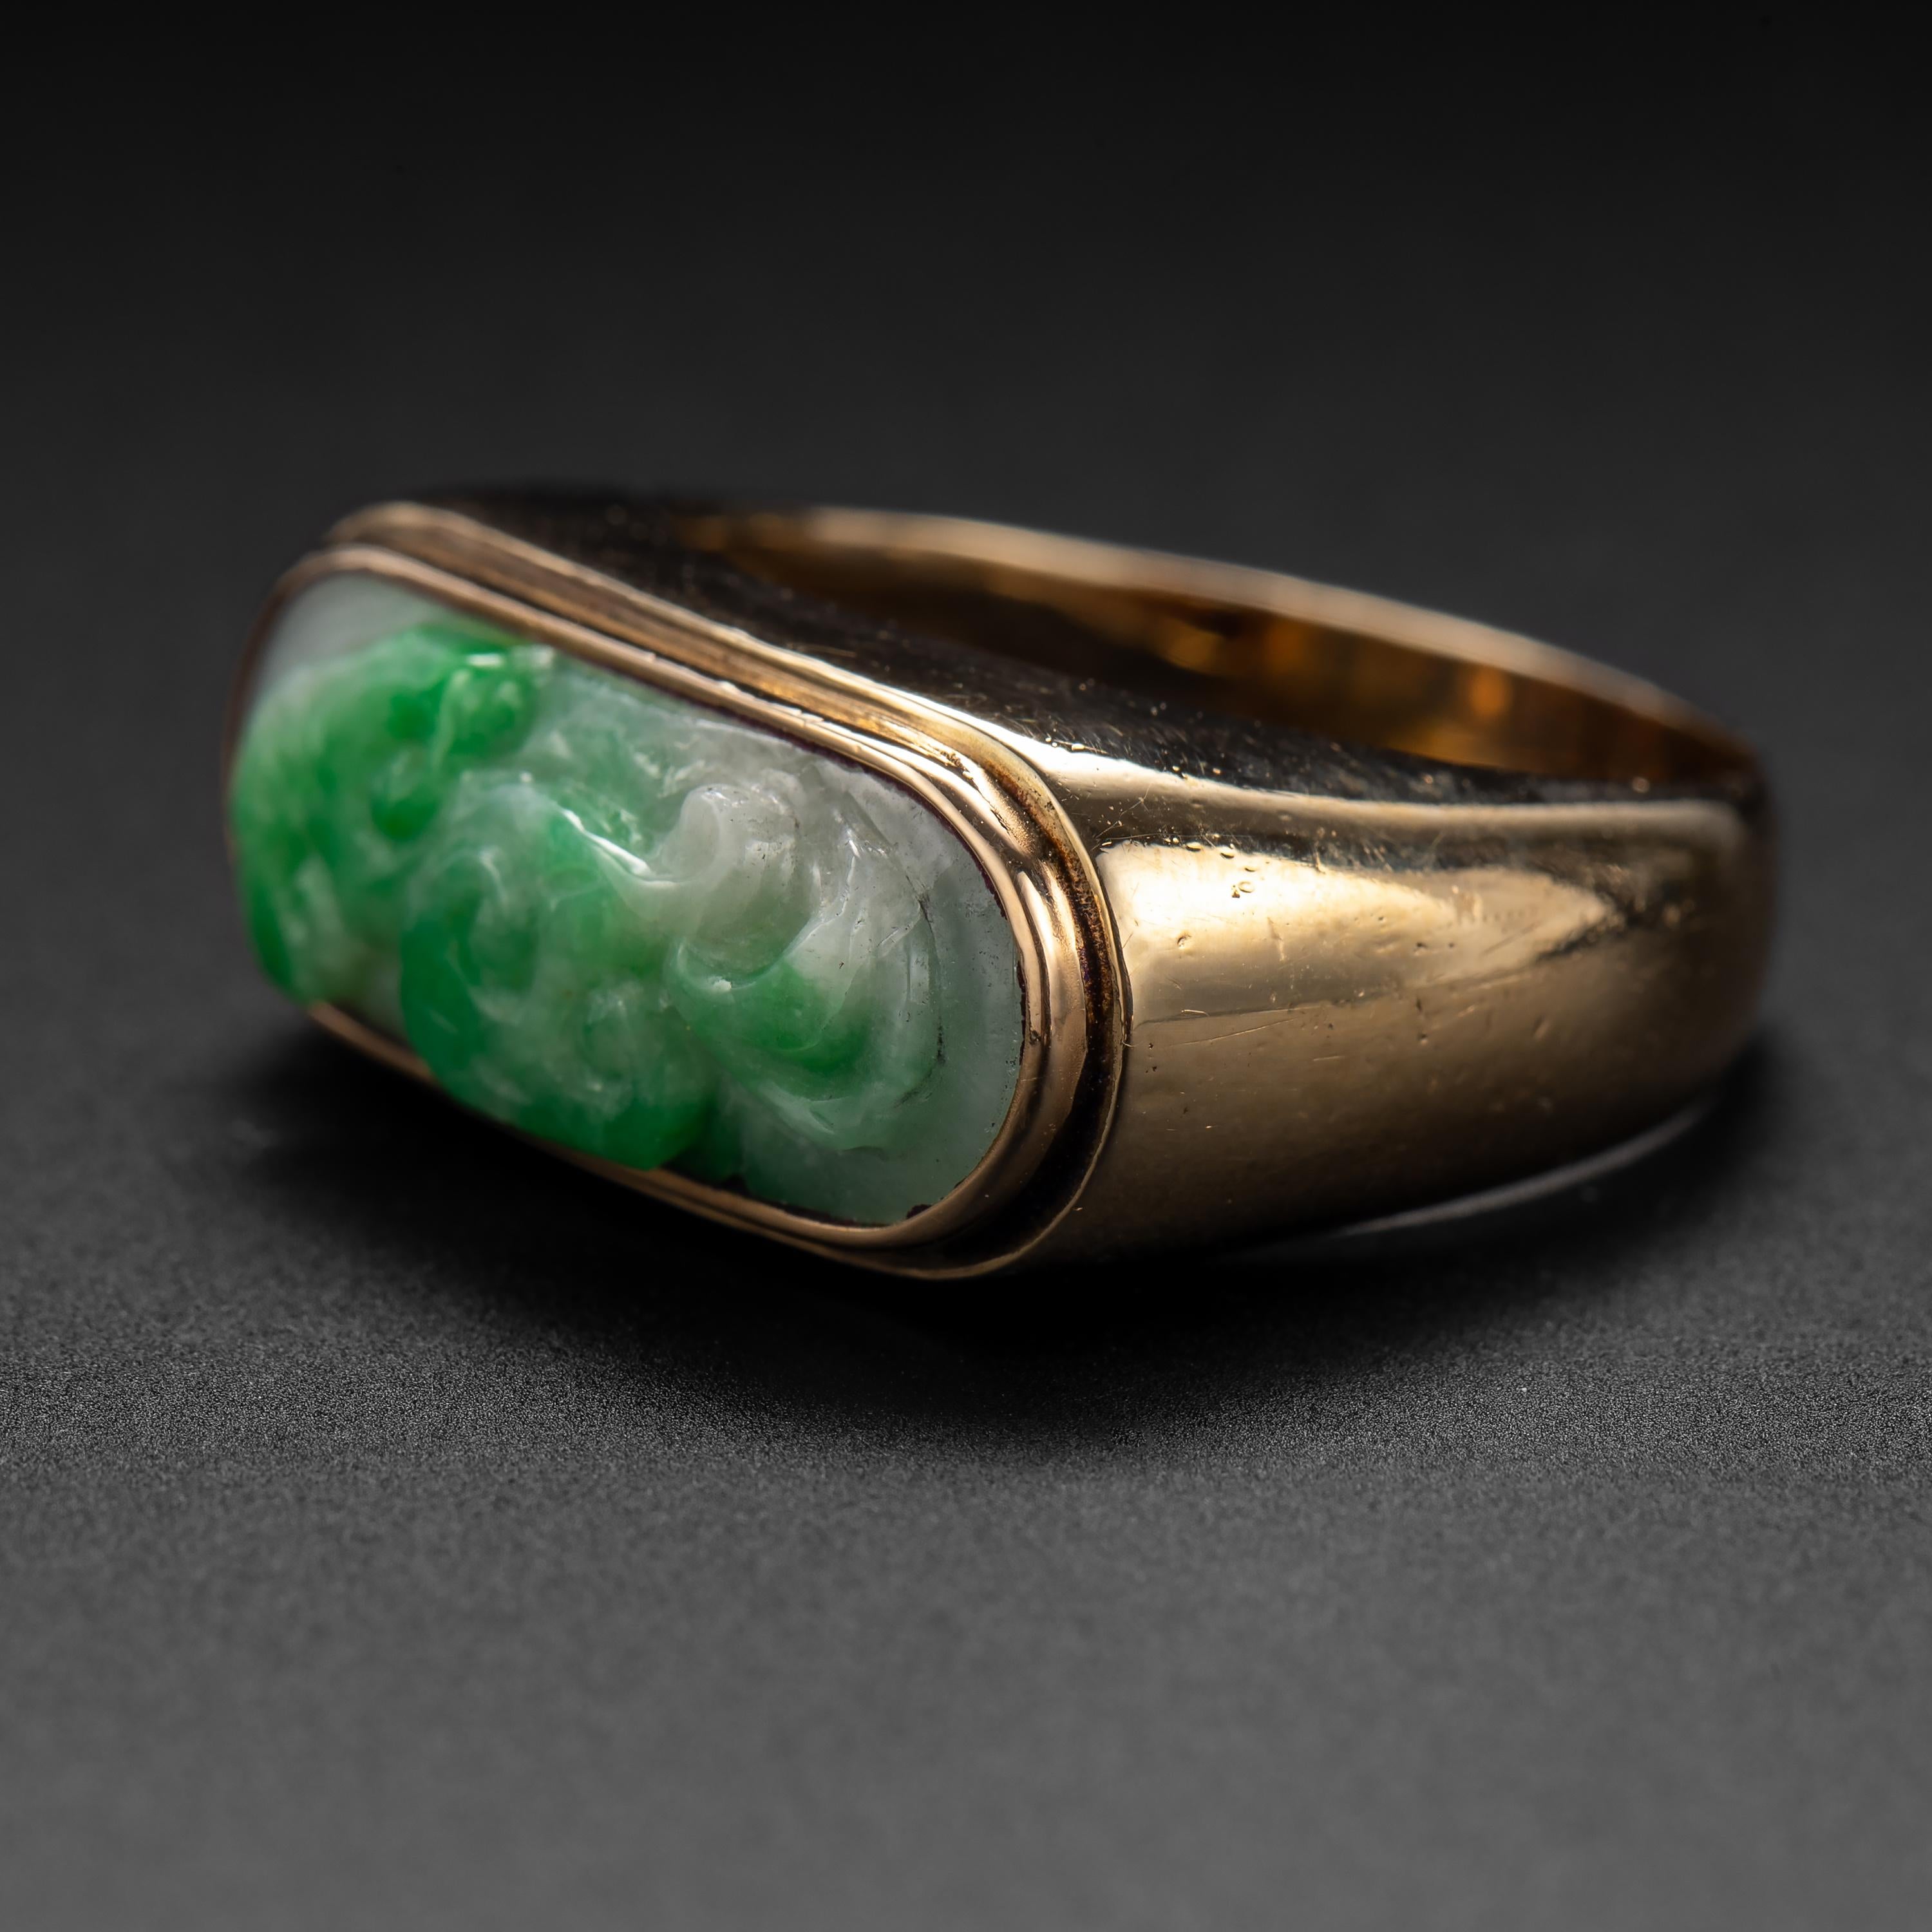 jade ring meaning